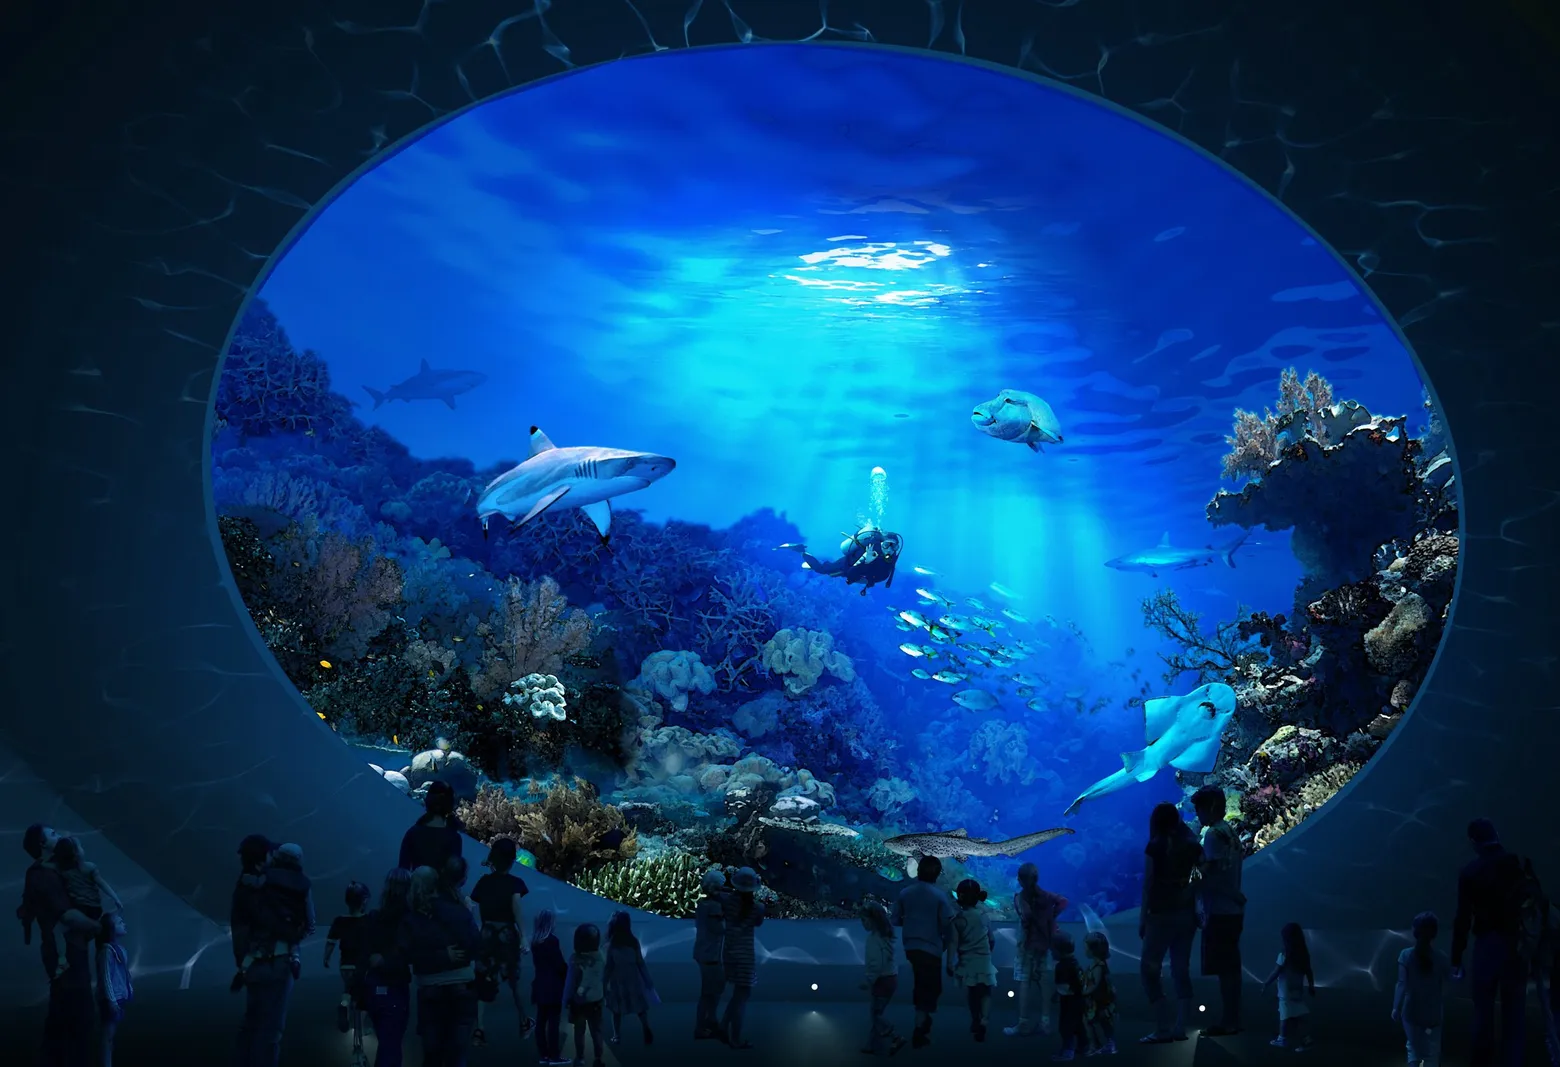  The Seattle Aquarium is also committed to marine conservation